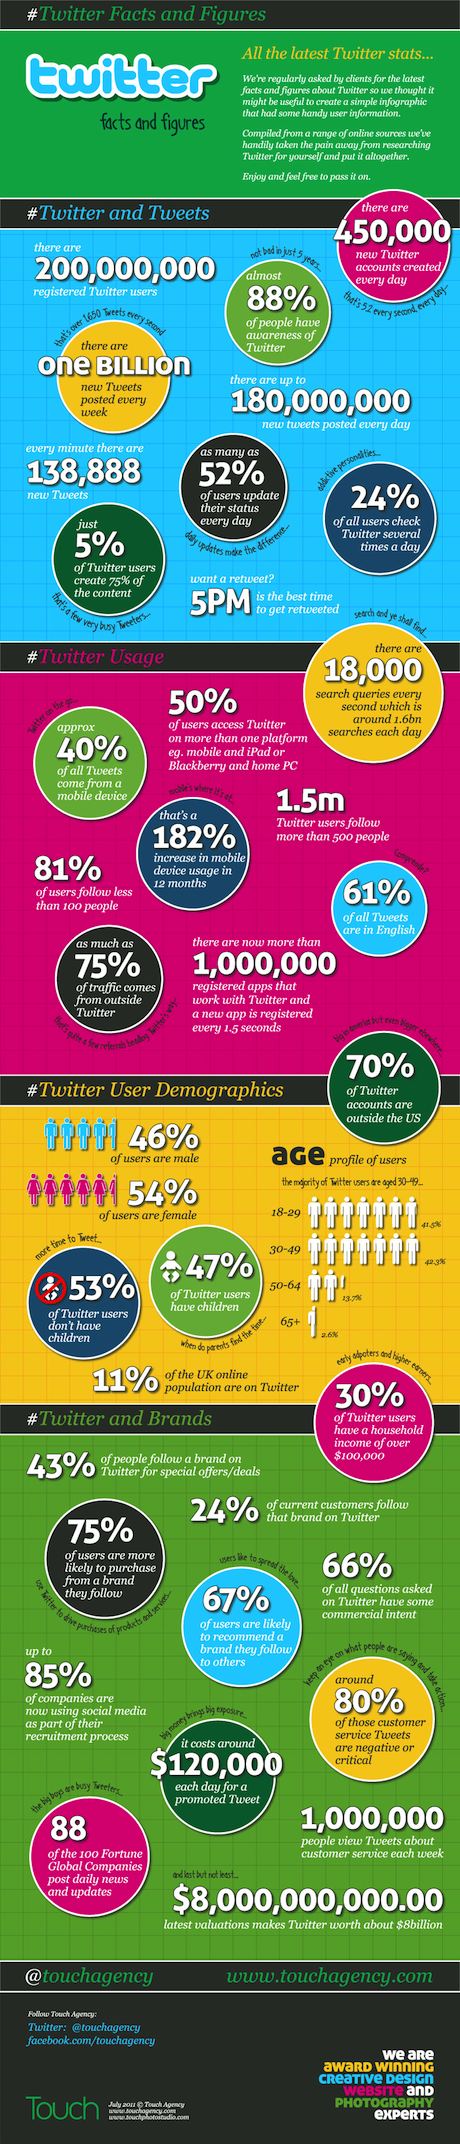 Twitter: Faces & Figures - Infographic by Touch Agency